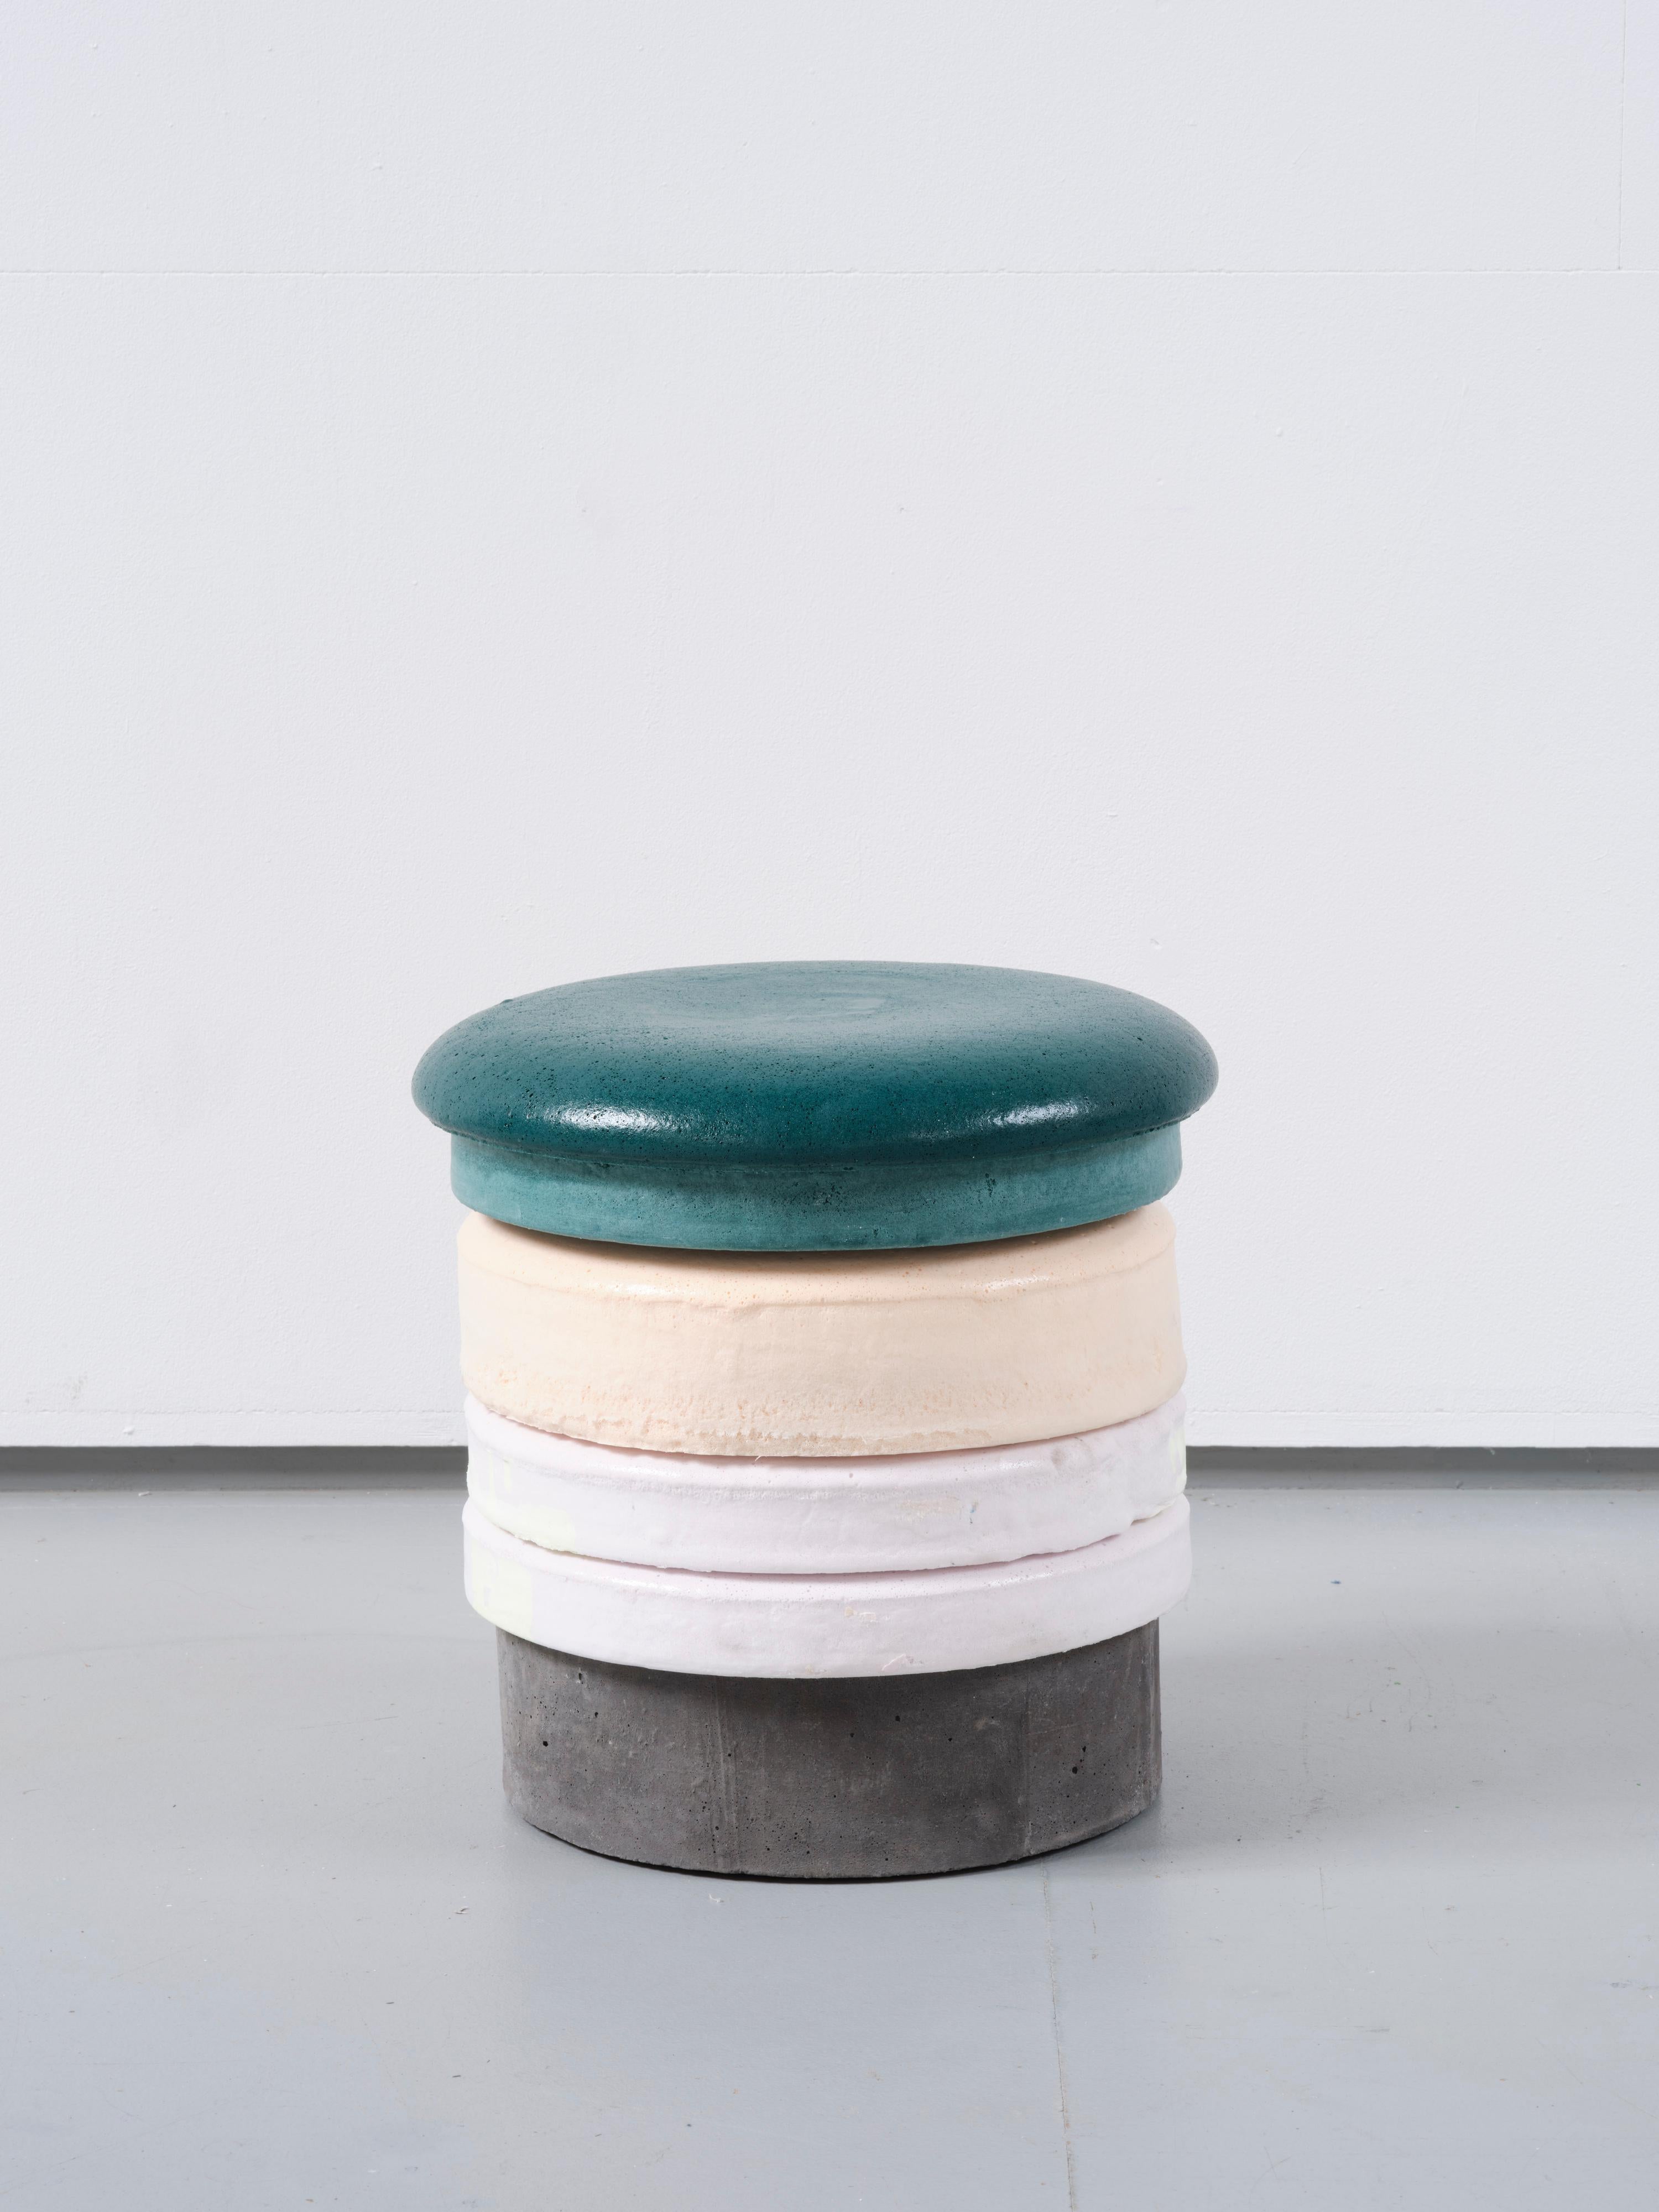 Cristian Andersen
Macaron stool, 2020
Each unique, signed by the artist
Polyurethane, pigments, concrete and cork
Measures: H 39 cm (15 3/8 in), Ø 37 cm

Cristian Andersen (*1974) has been working at the interface between design and sculpture